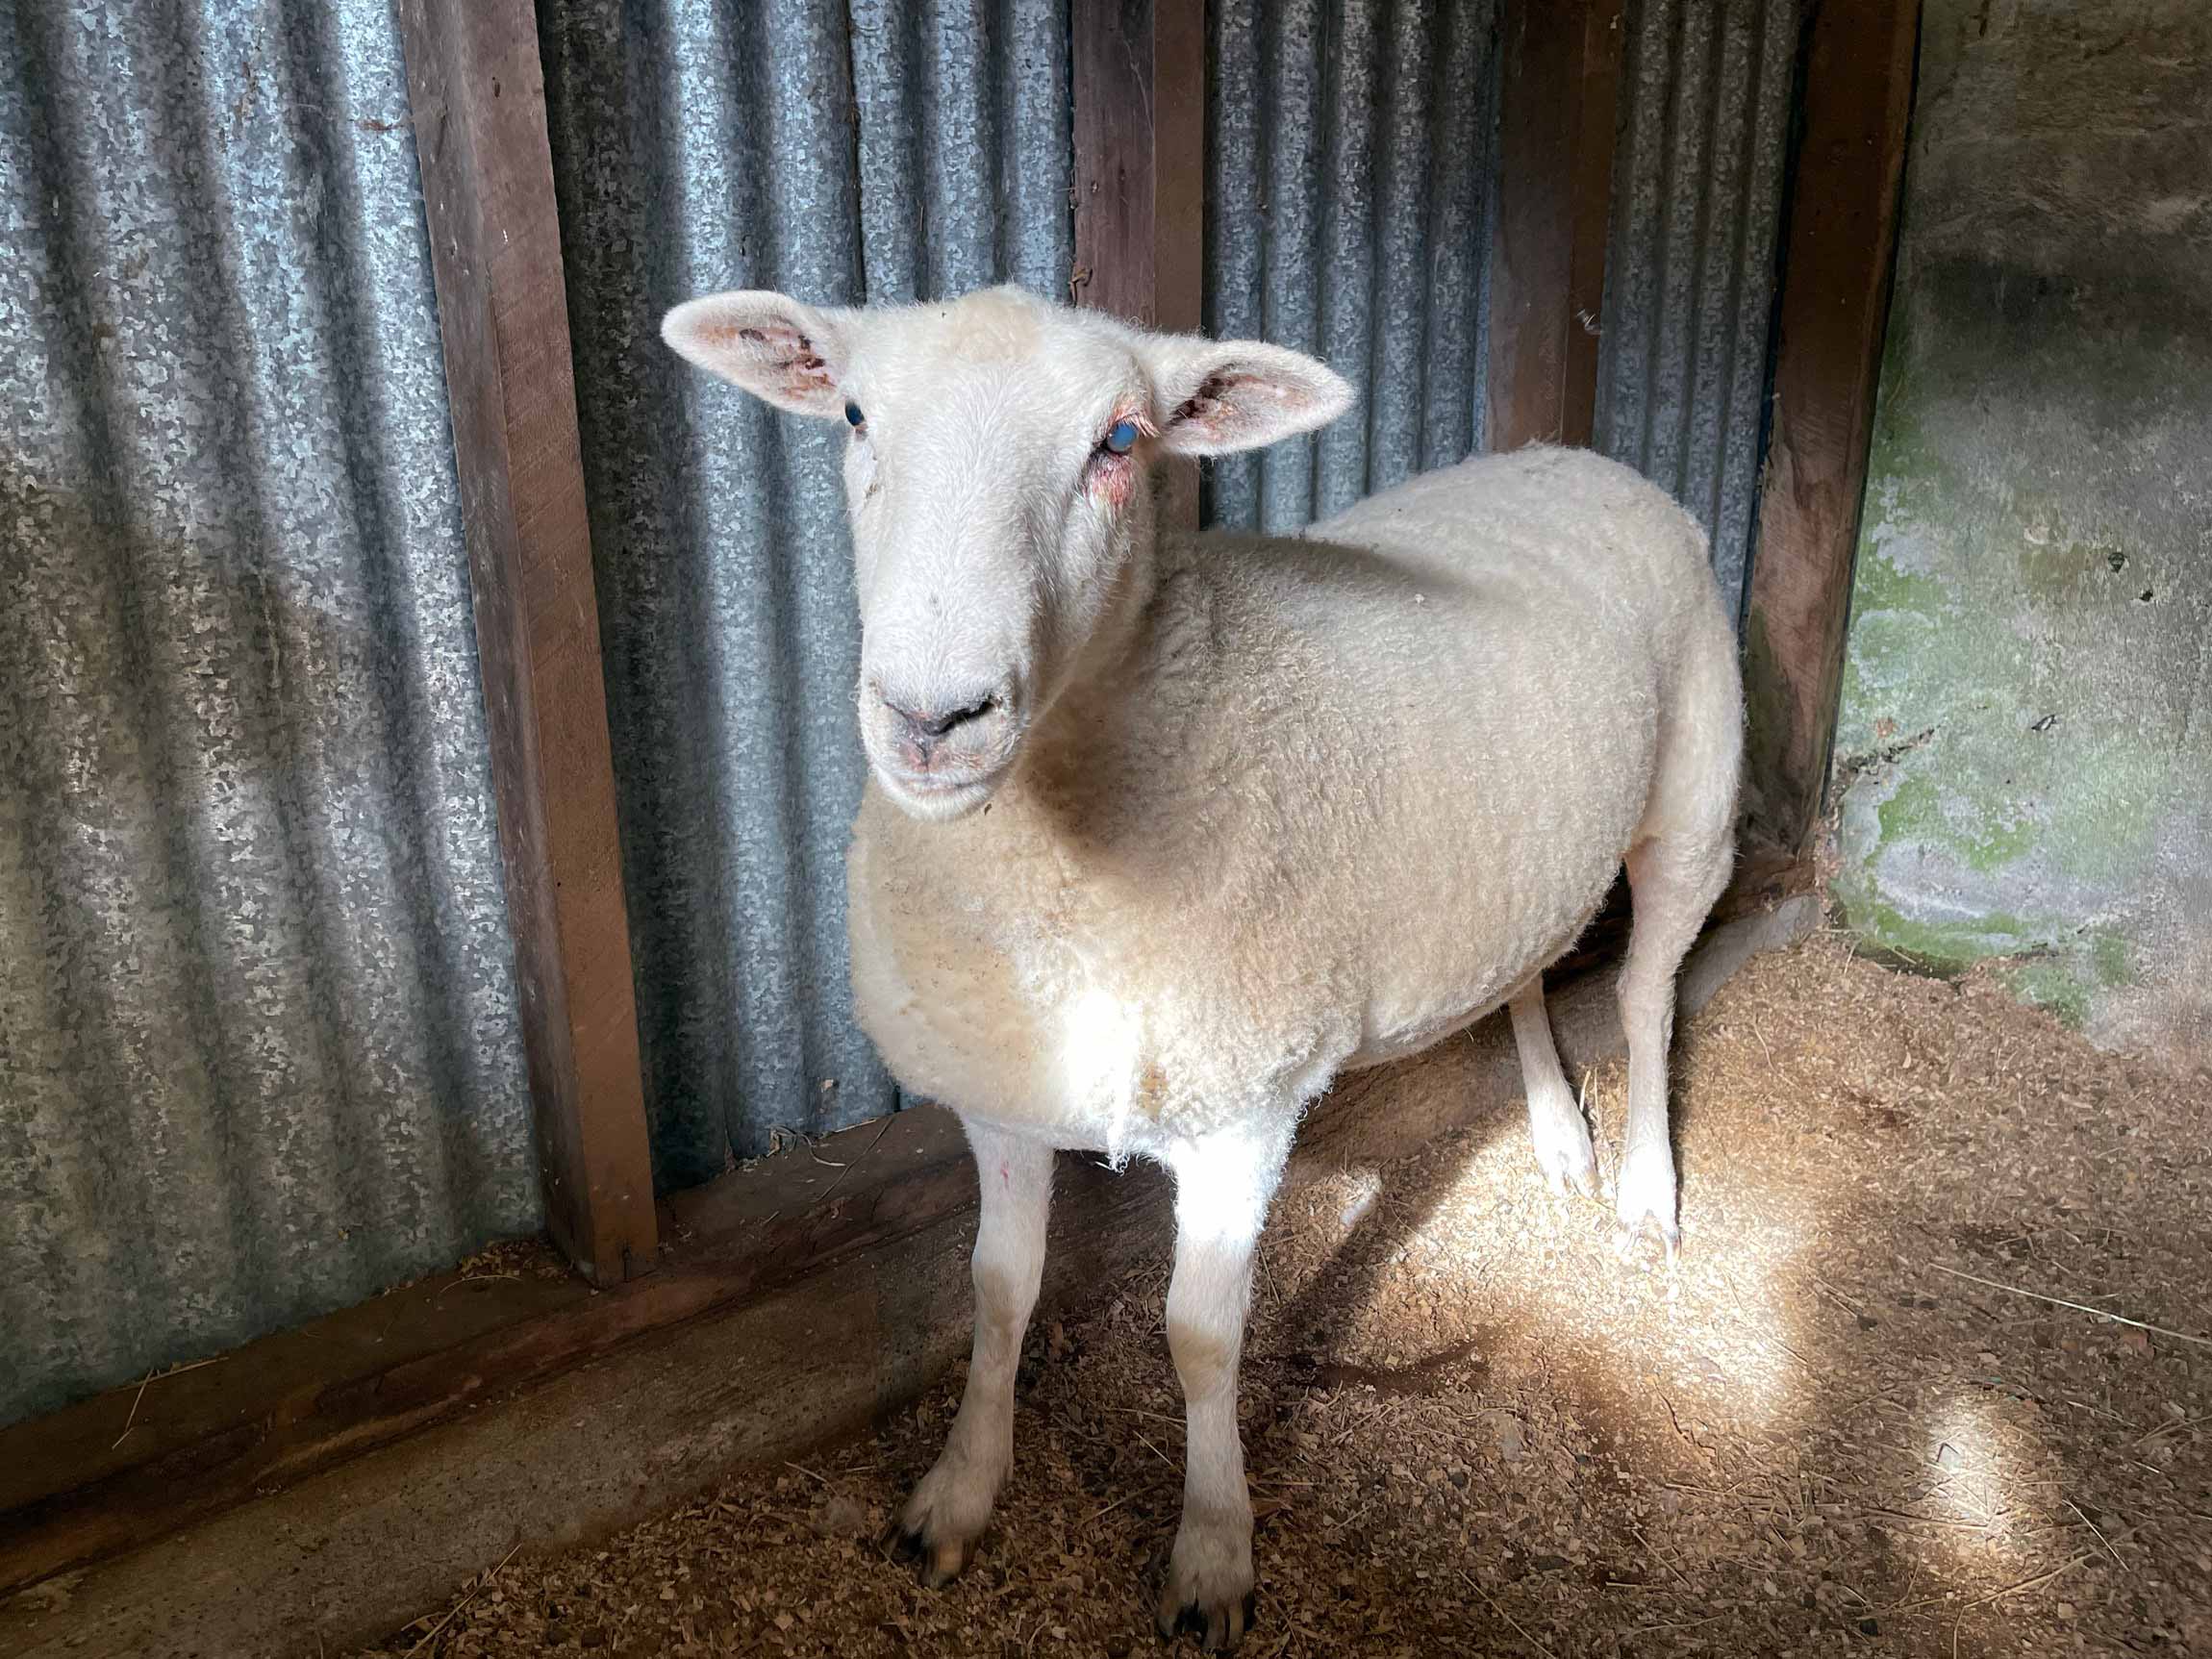 Homer (sheep) standing with his cloudy eye visible in the light.